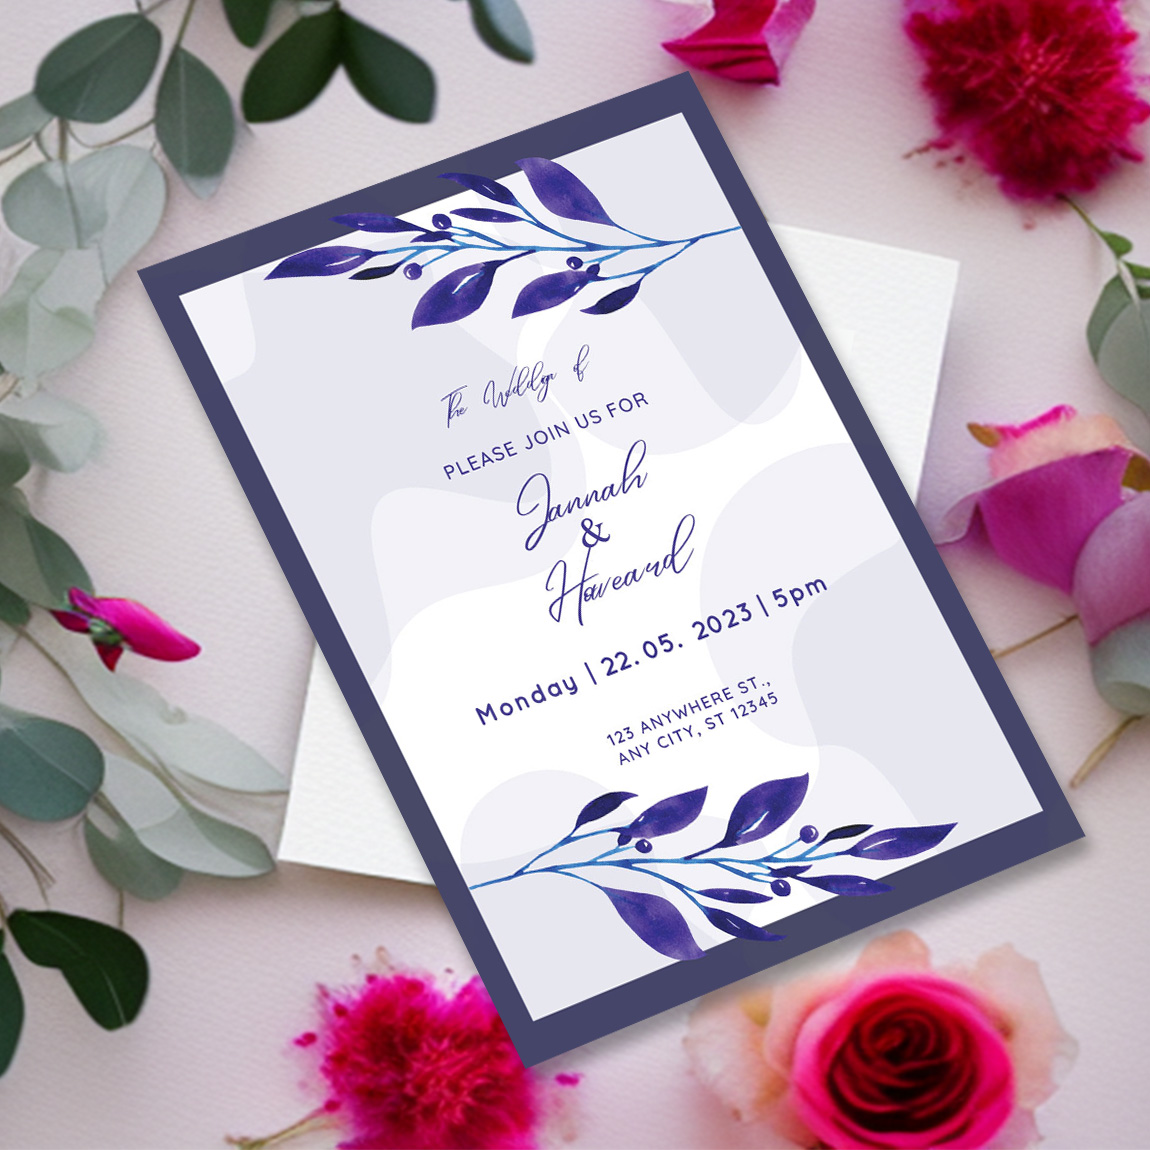 Image with irresistible wedding invitation in blue tones and leaves.